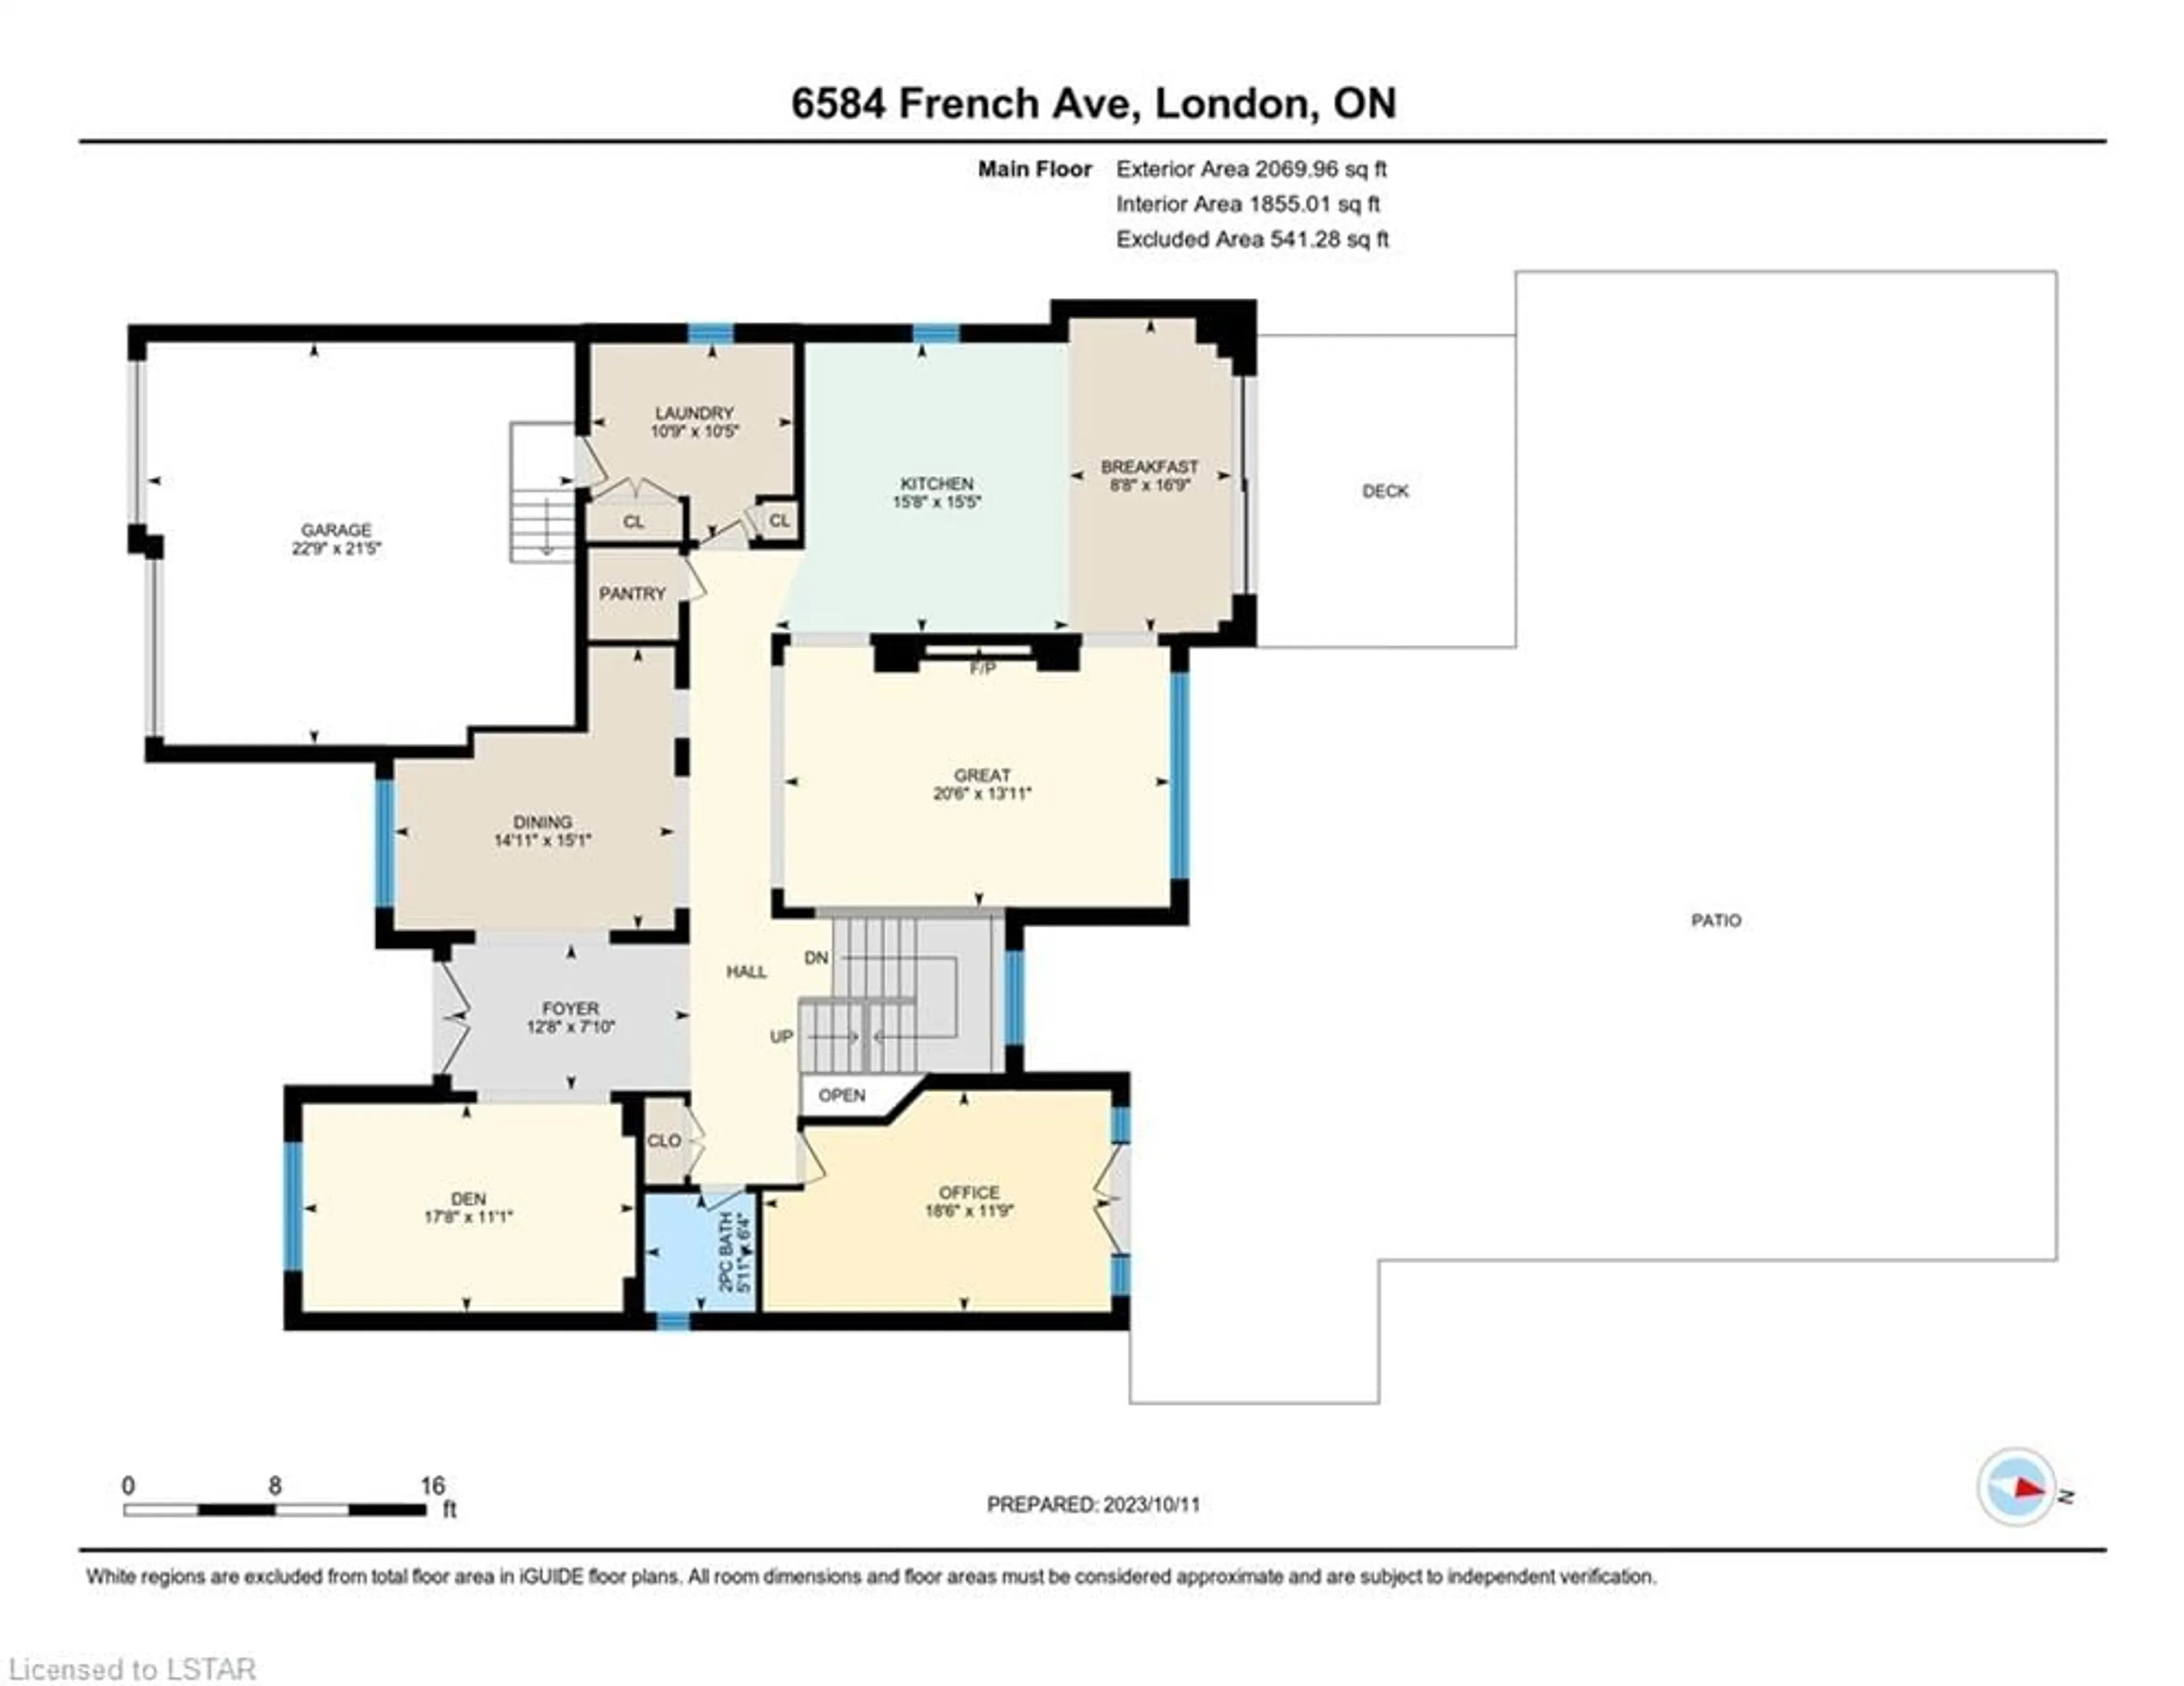 Floor plan for 6584 French Ave, London Ontario N6P 0G5